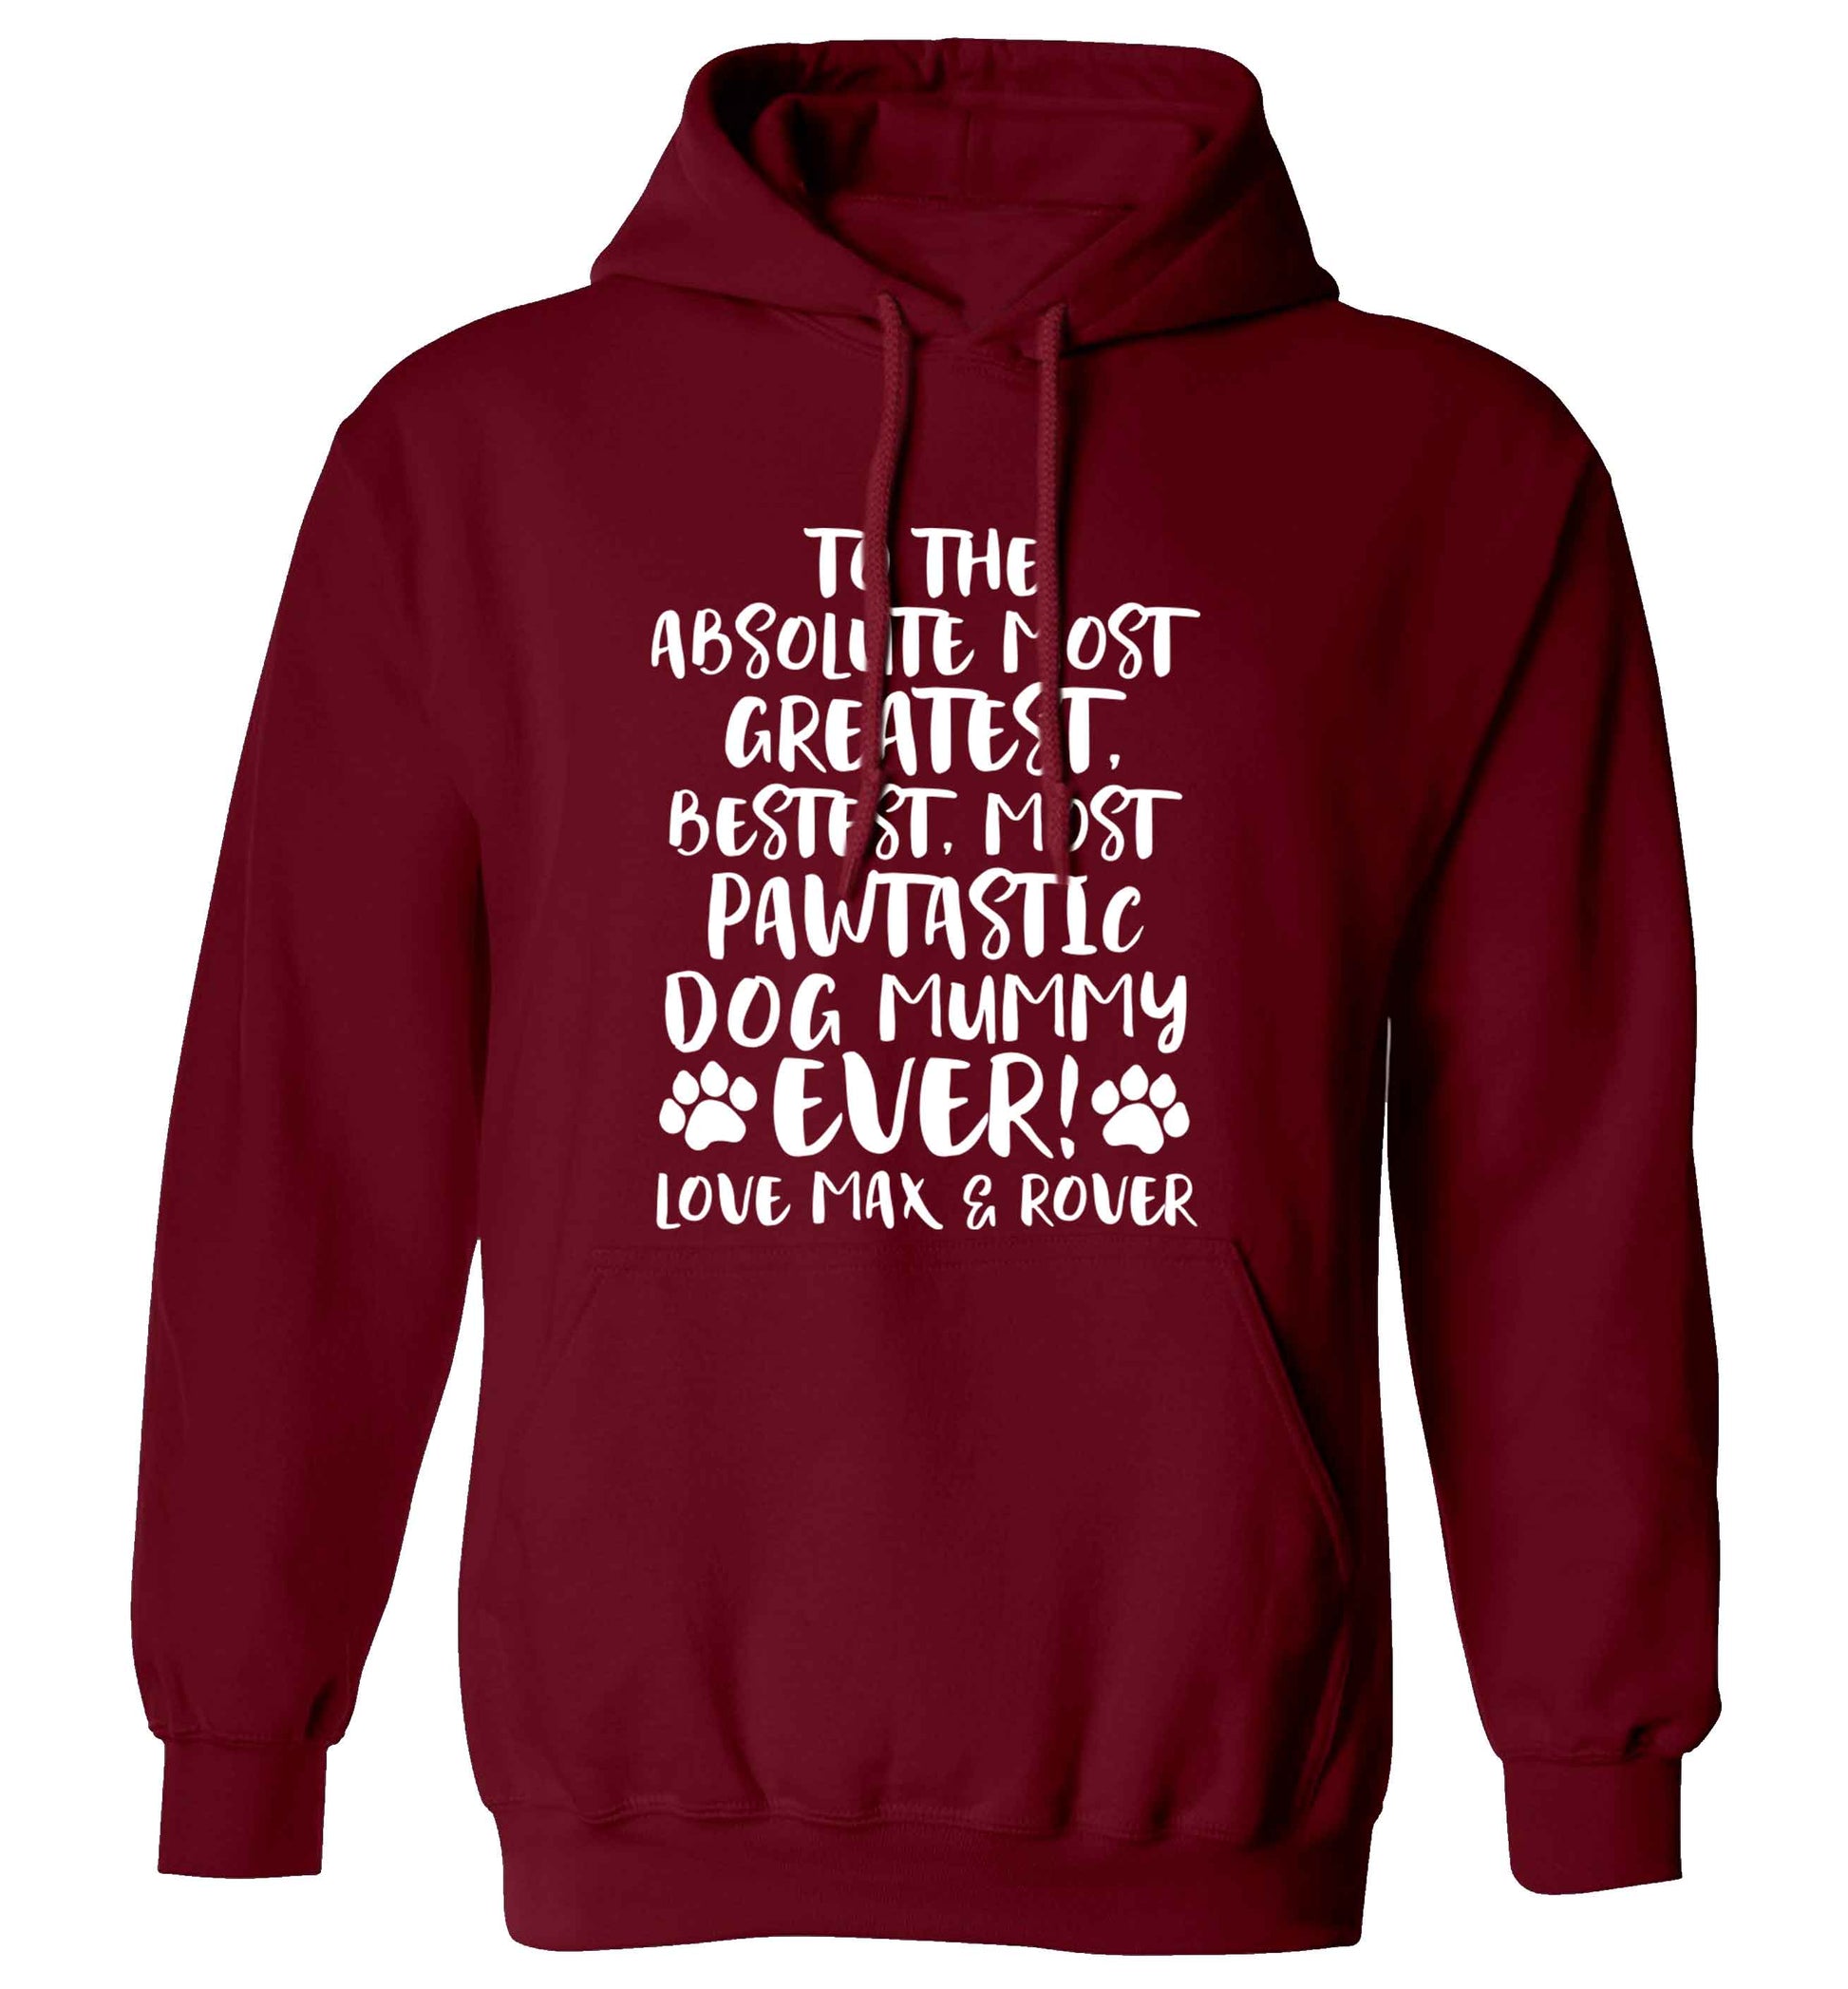 Personalsied to the most pawtastic dog mummy ever adults unisex maroon hoodie 2XL